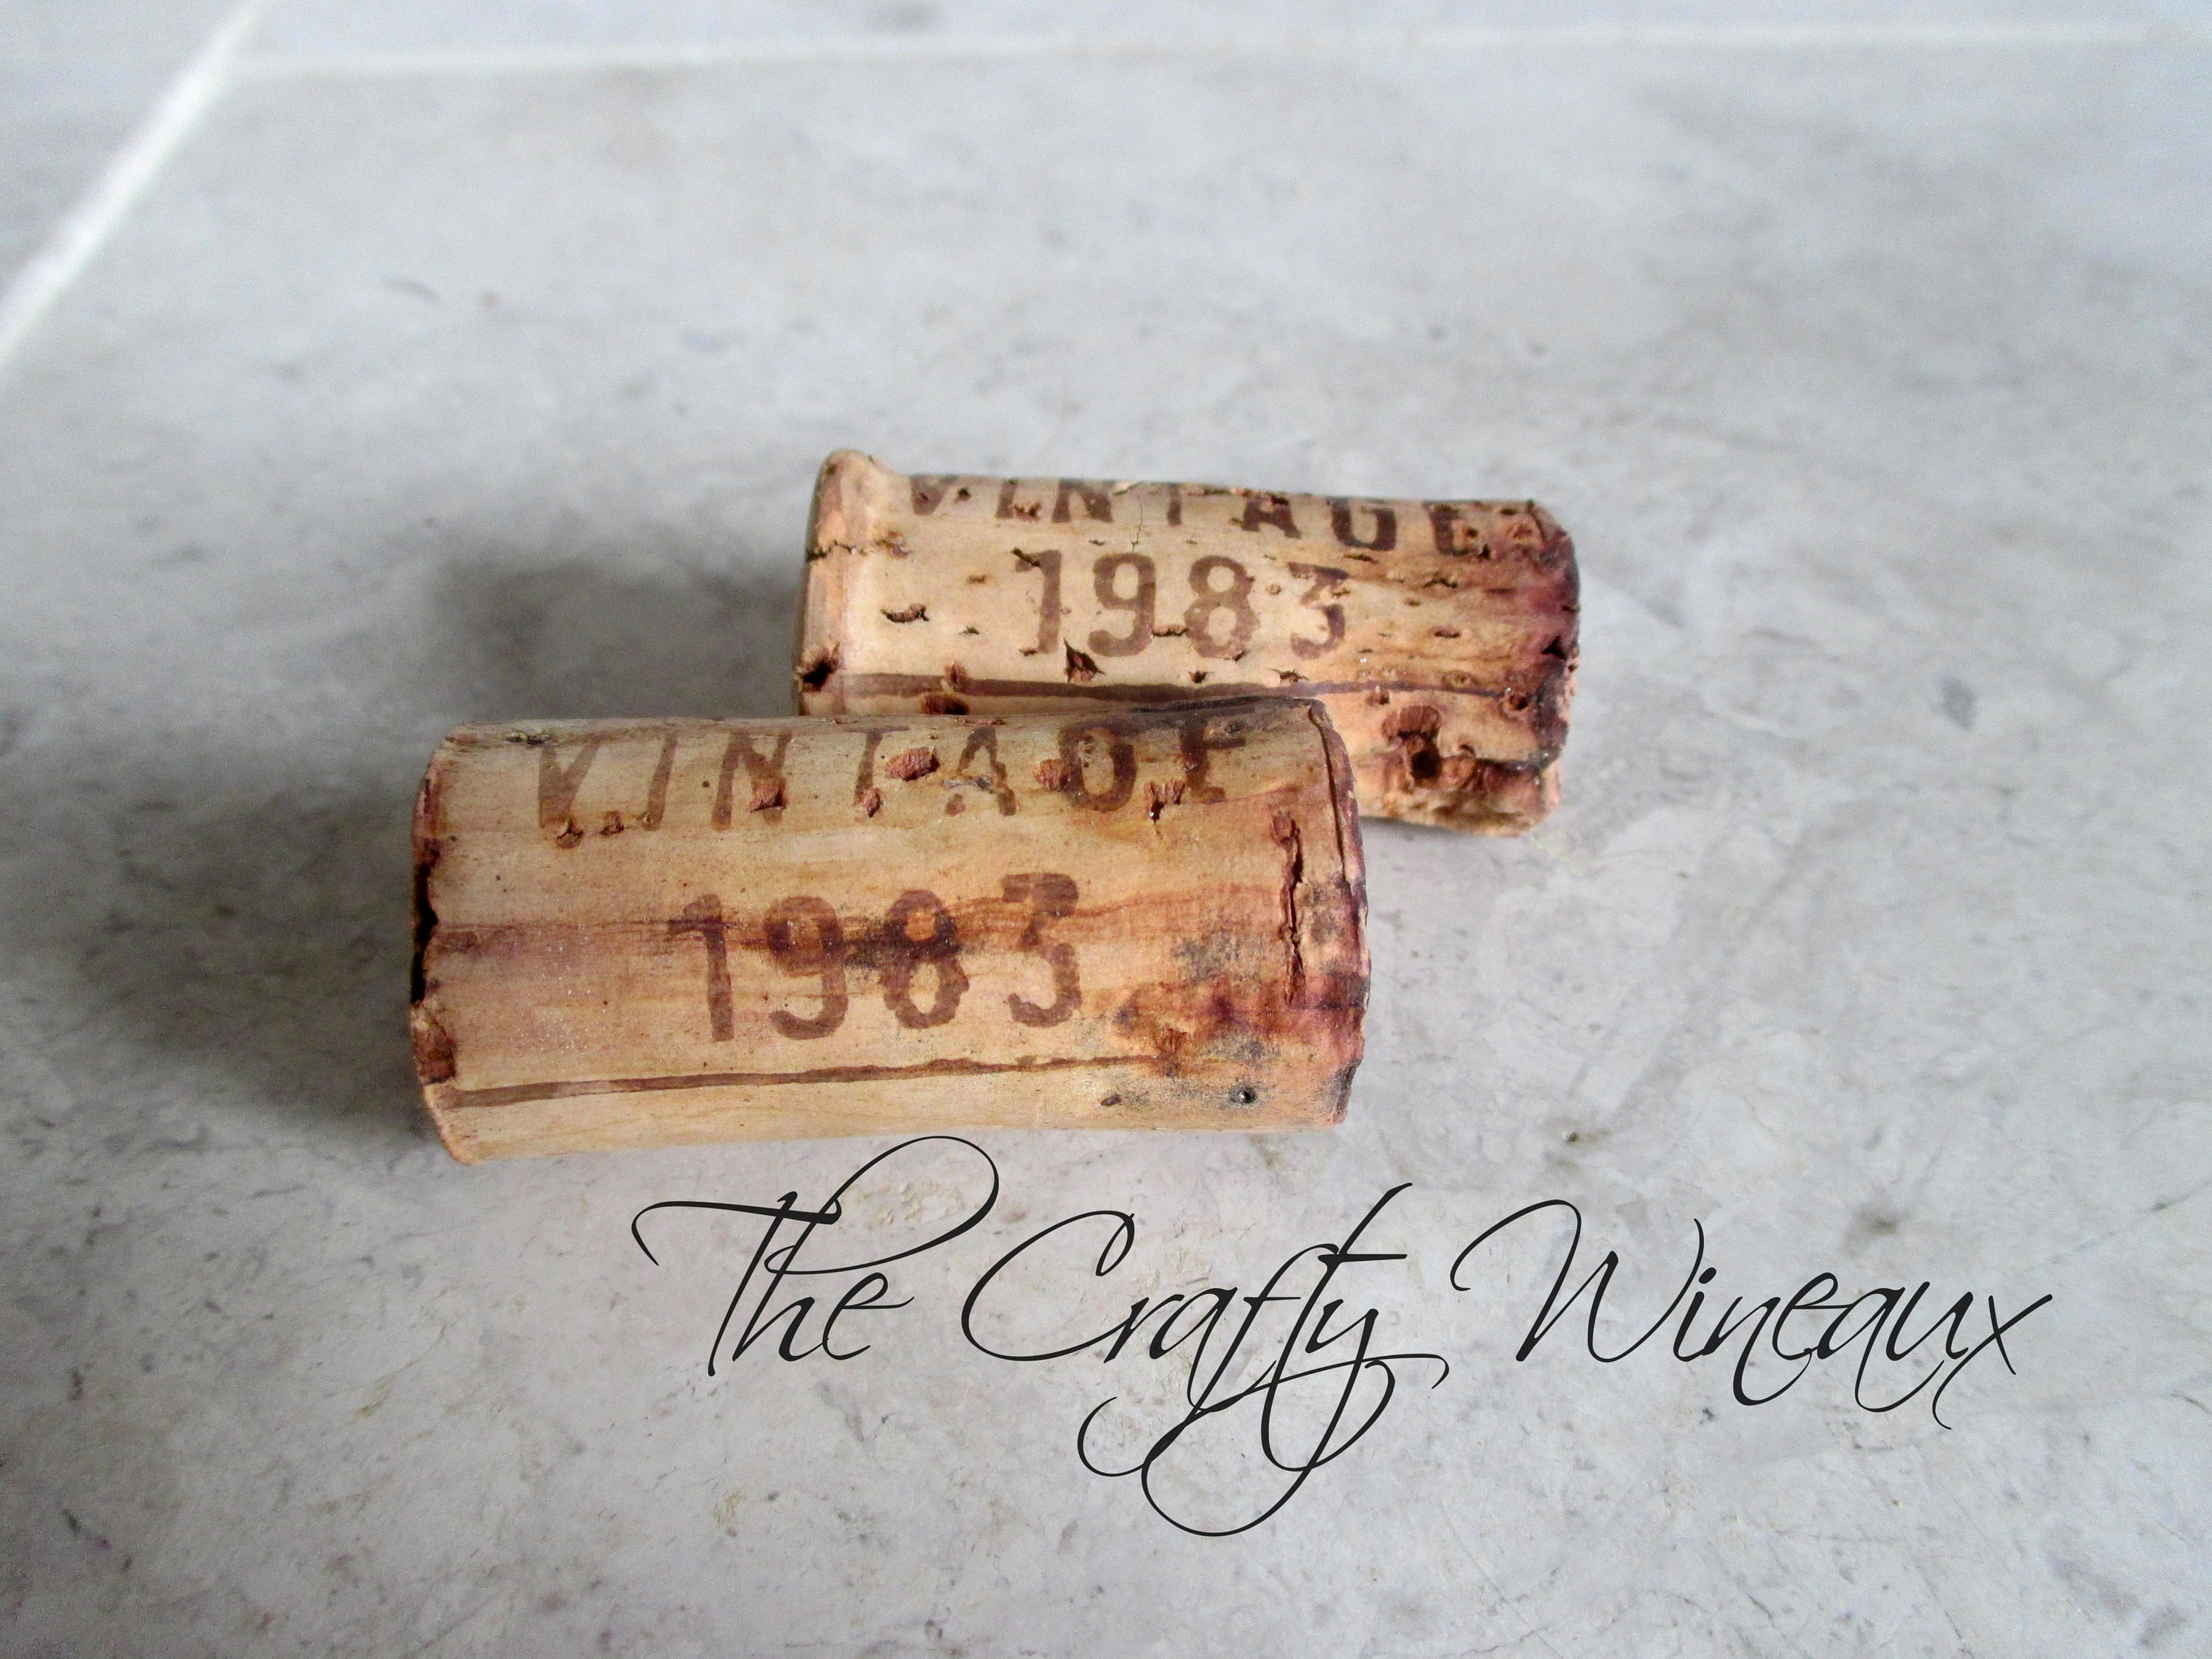 Natural Wine Bottle Corks for Crafts - 30 in this lot.